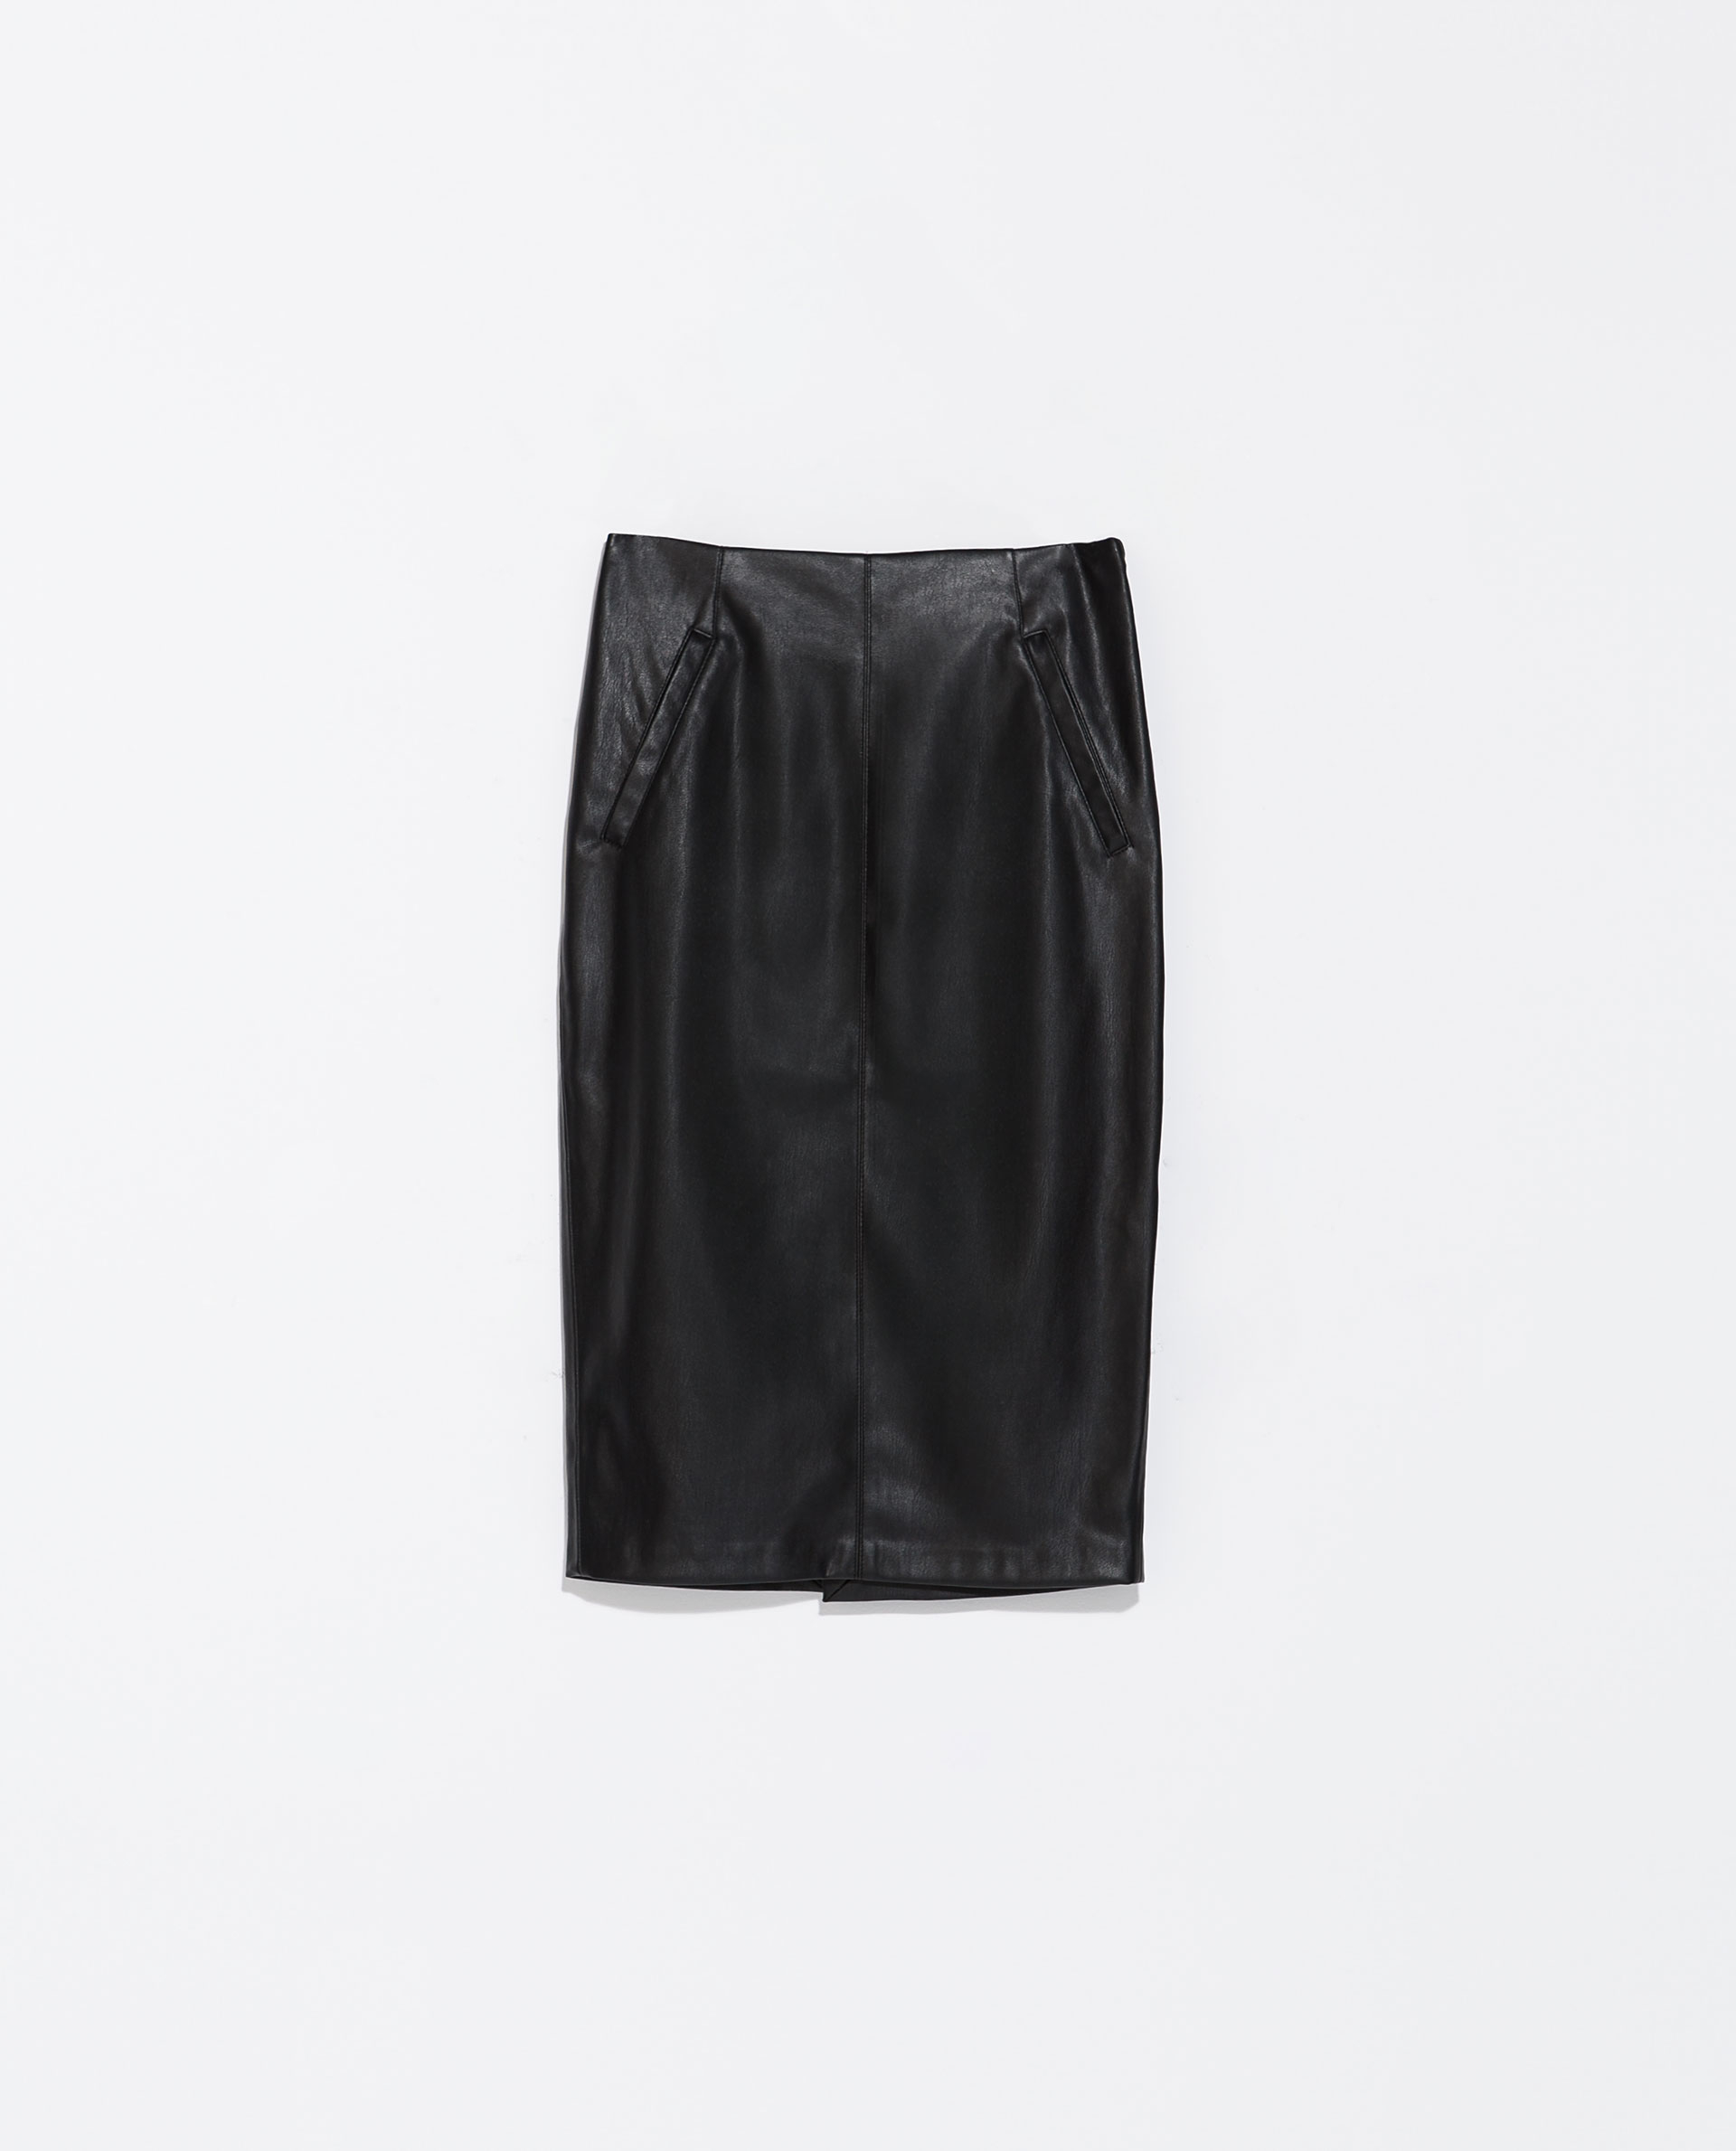 Zara Faux Leather Pencil Skirt with Pockets in Black | Lyst